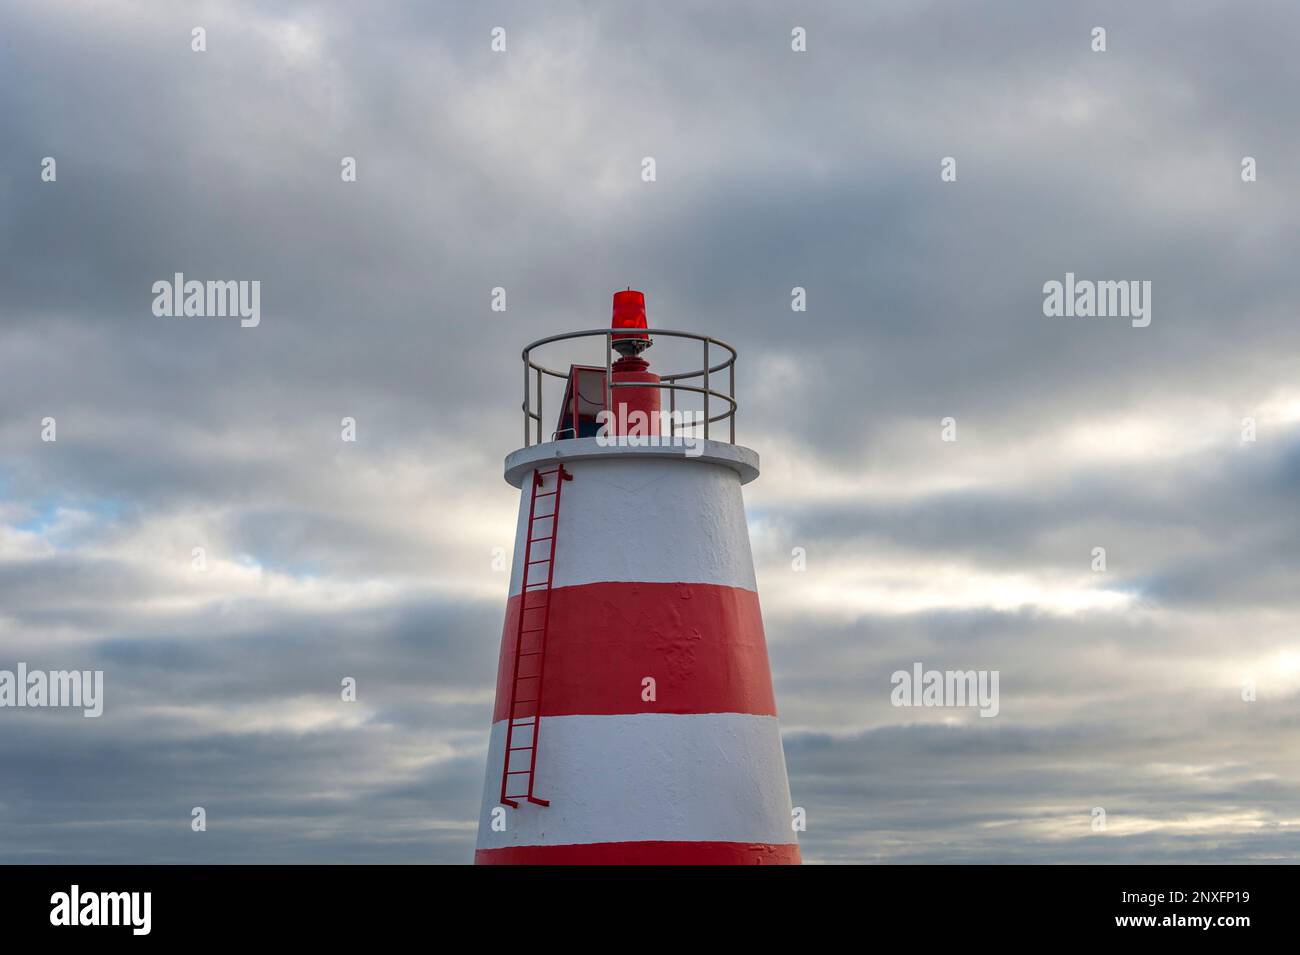 Top of a red and white lighthouse beacon against a cloudy sky. Foto Stock